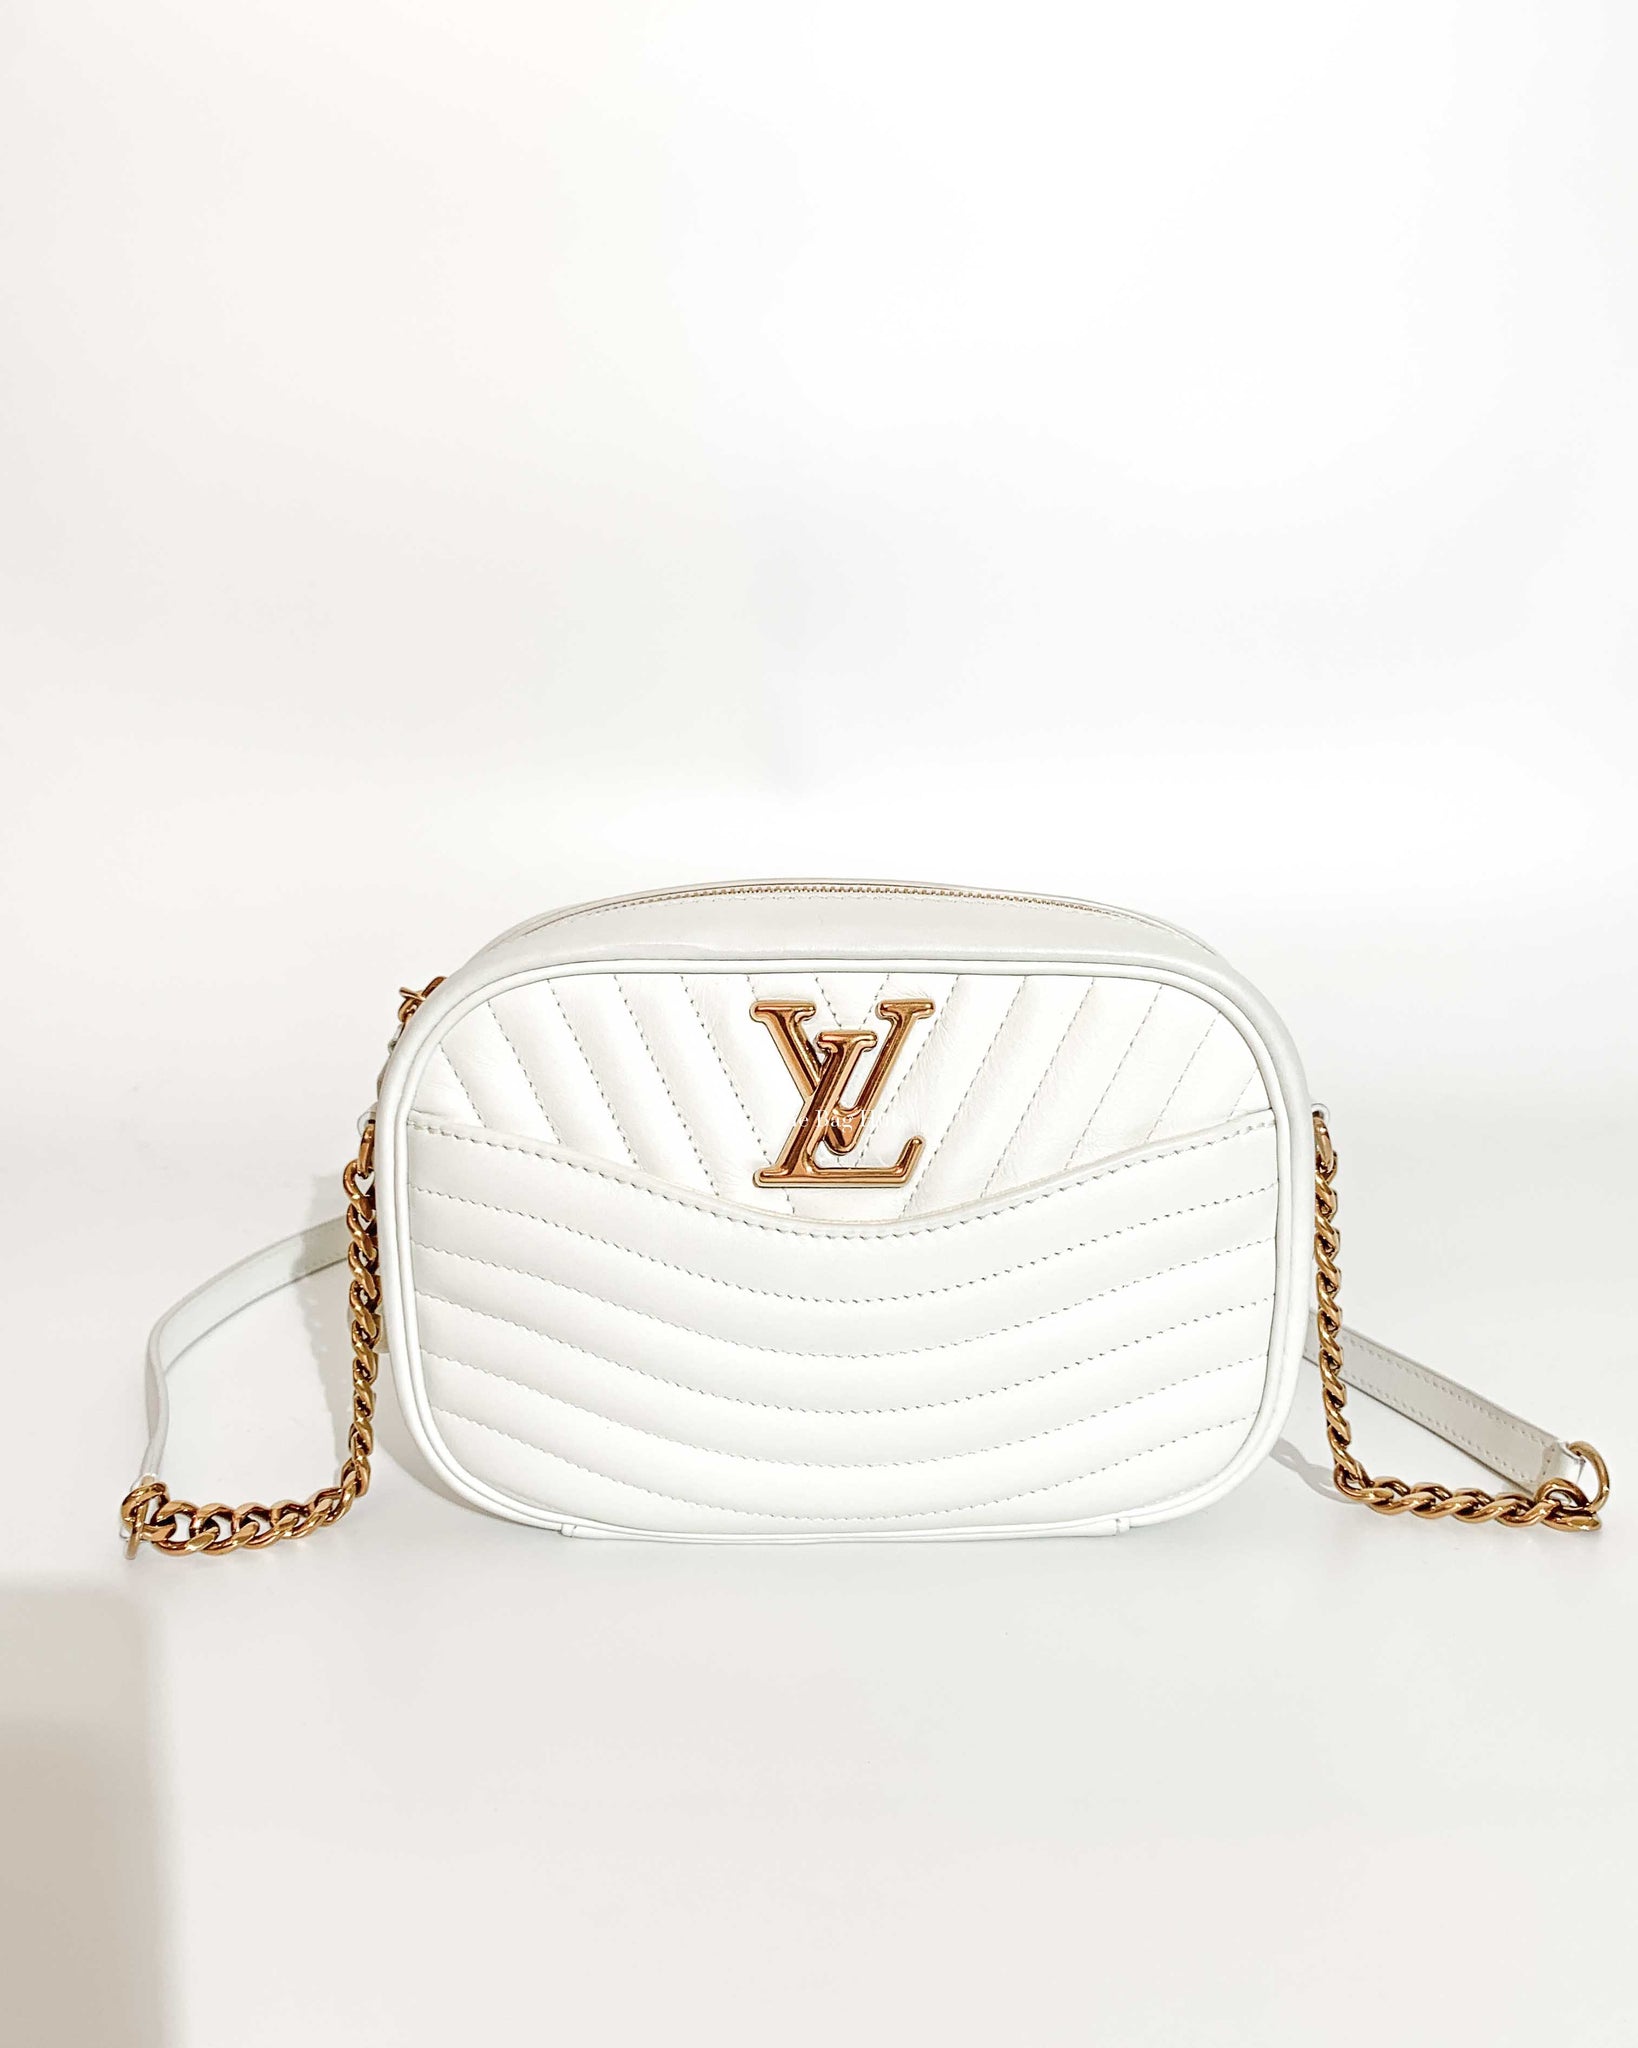 Compare prices for Louis Vuitton New Wave Camera Bag (M55330) in official  stores